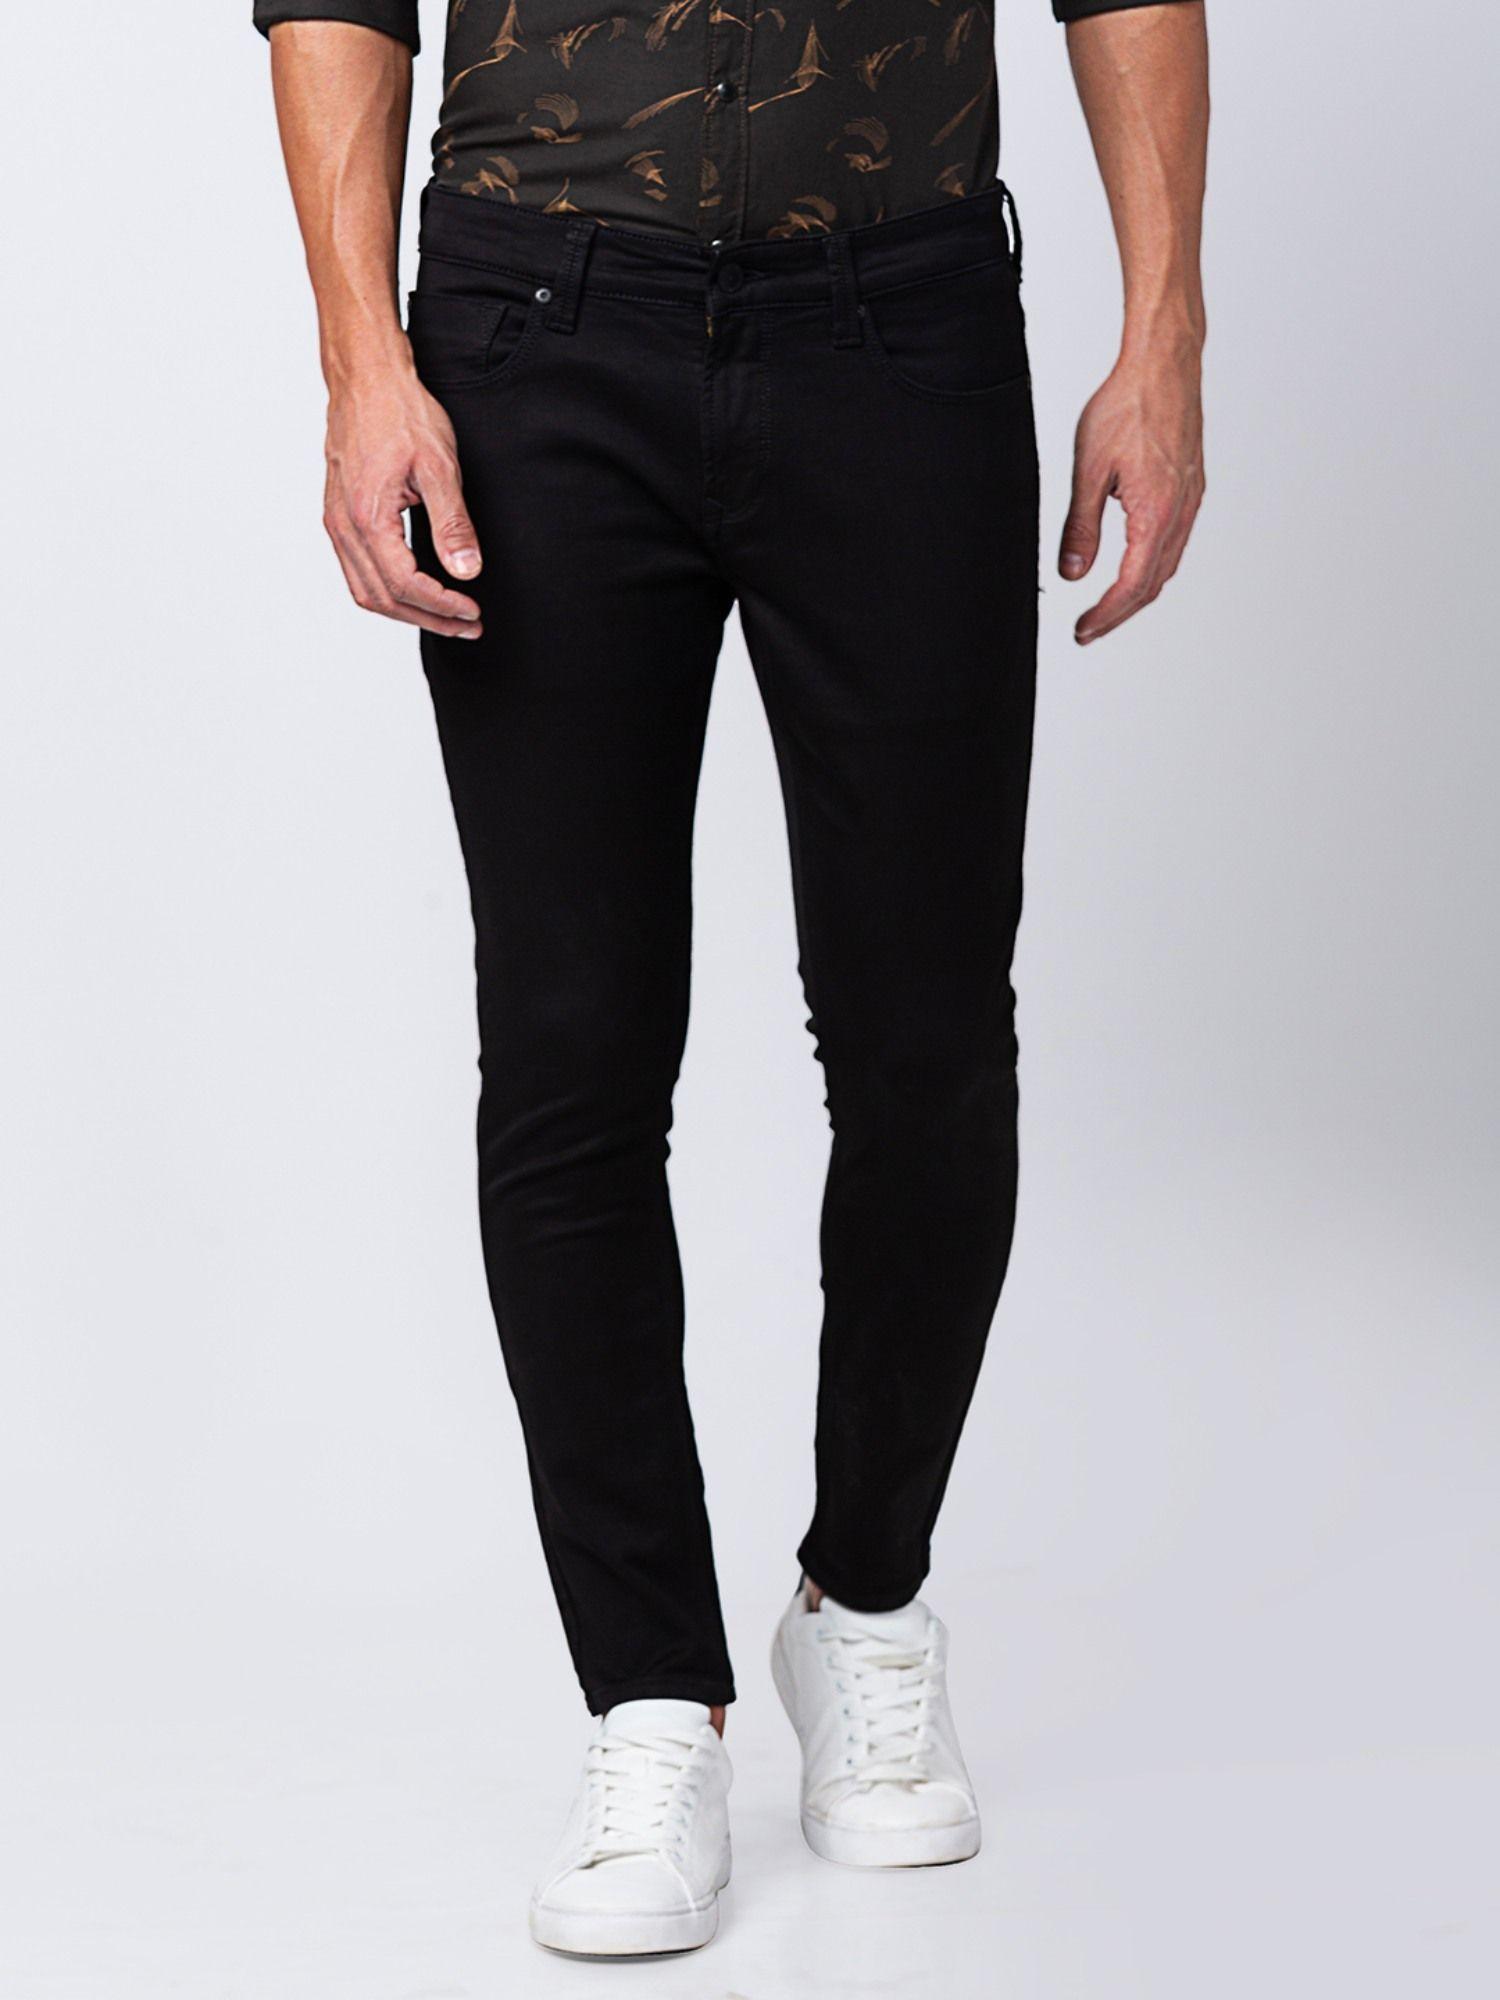 black mid rise tapered fit jeans for men